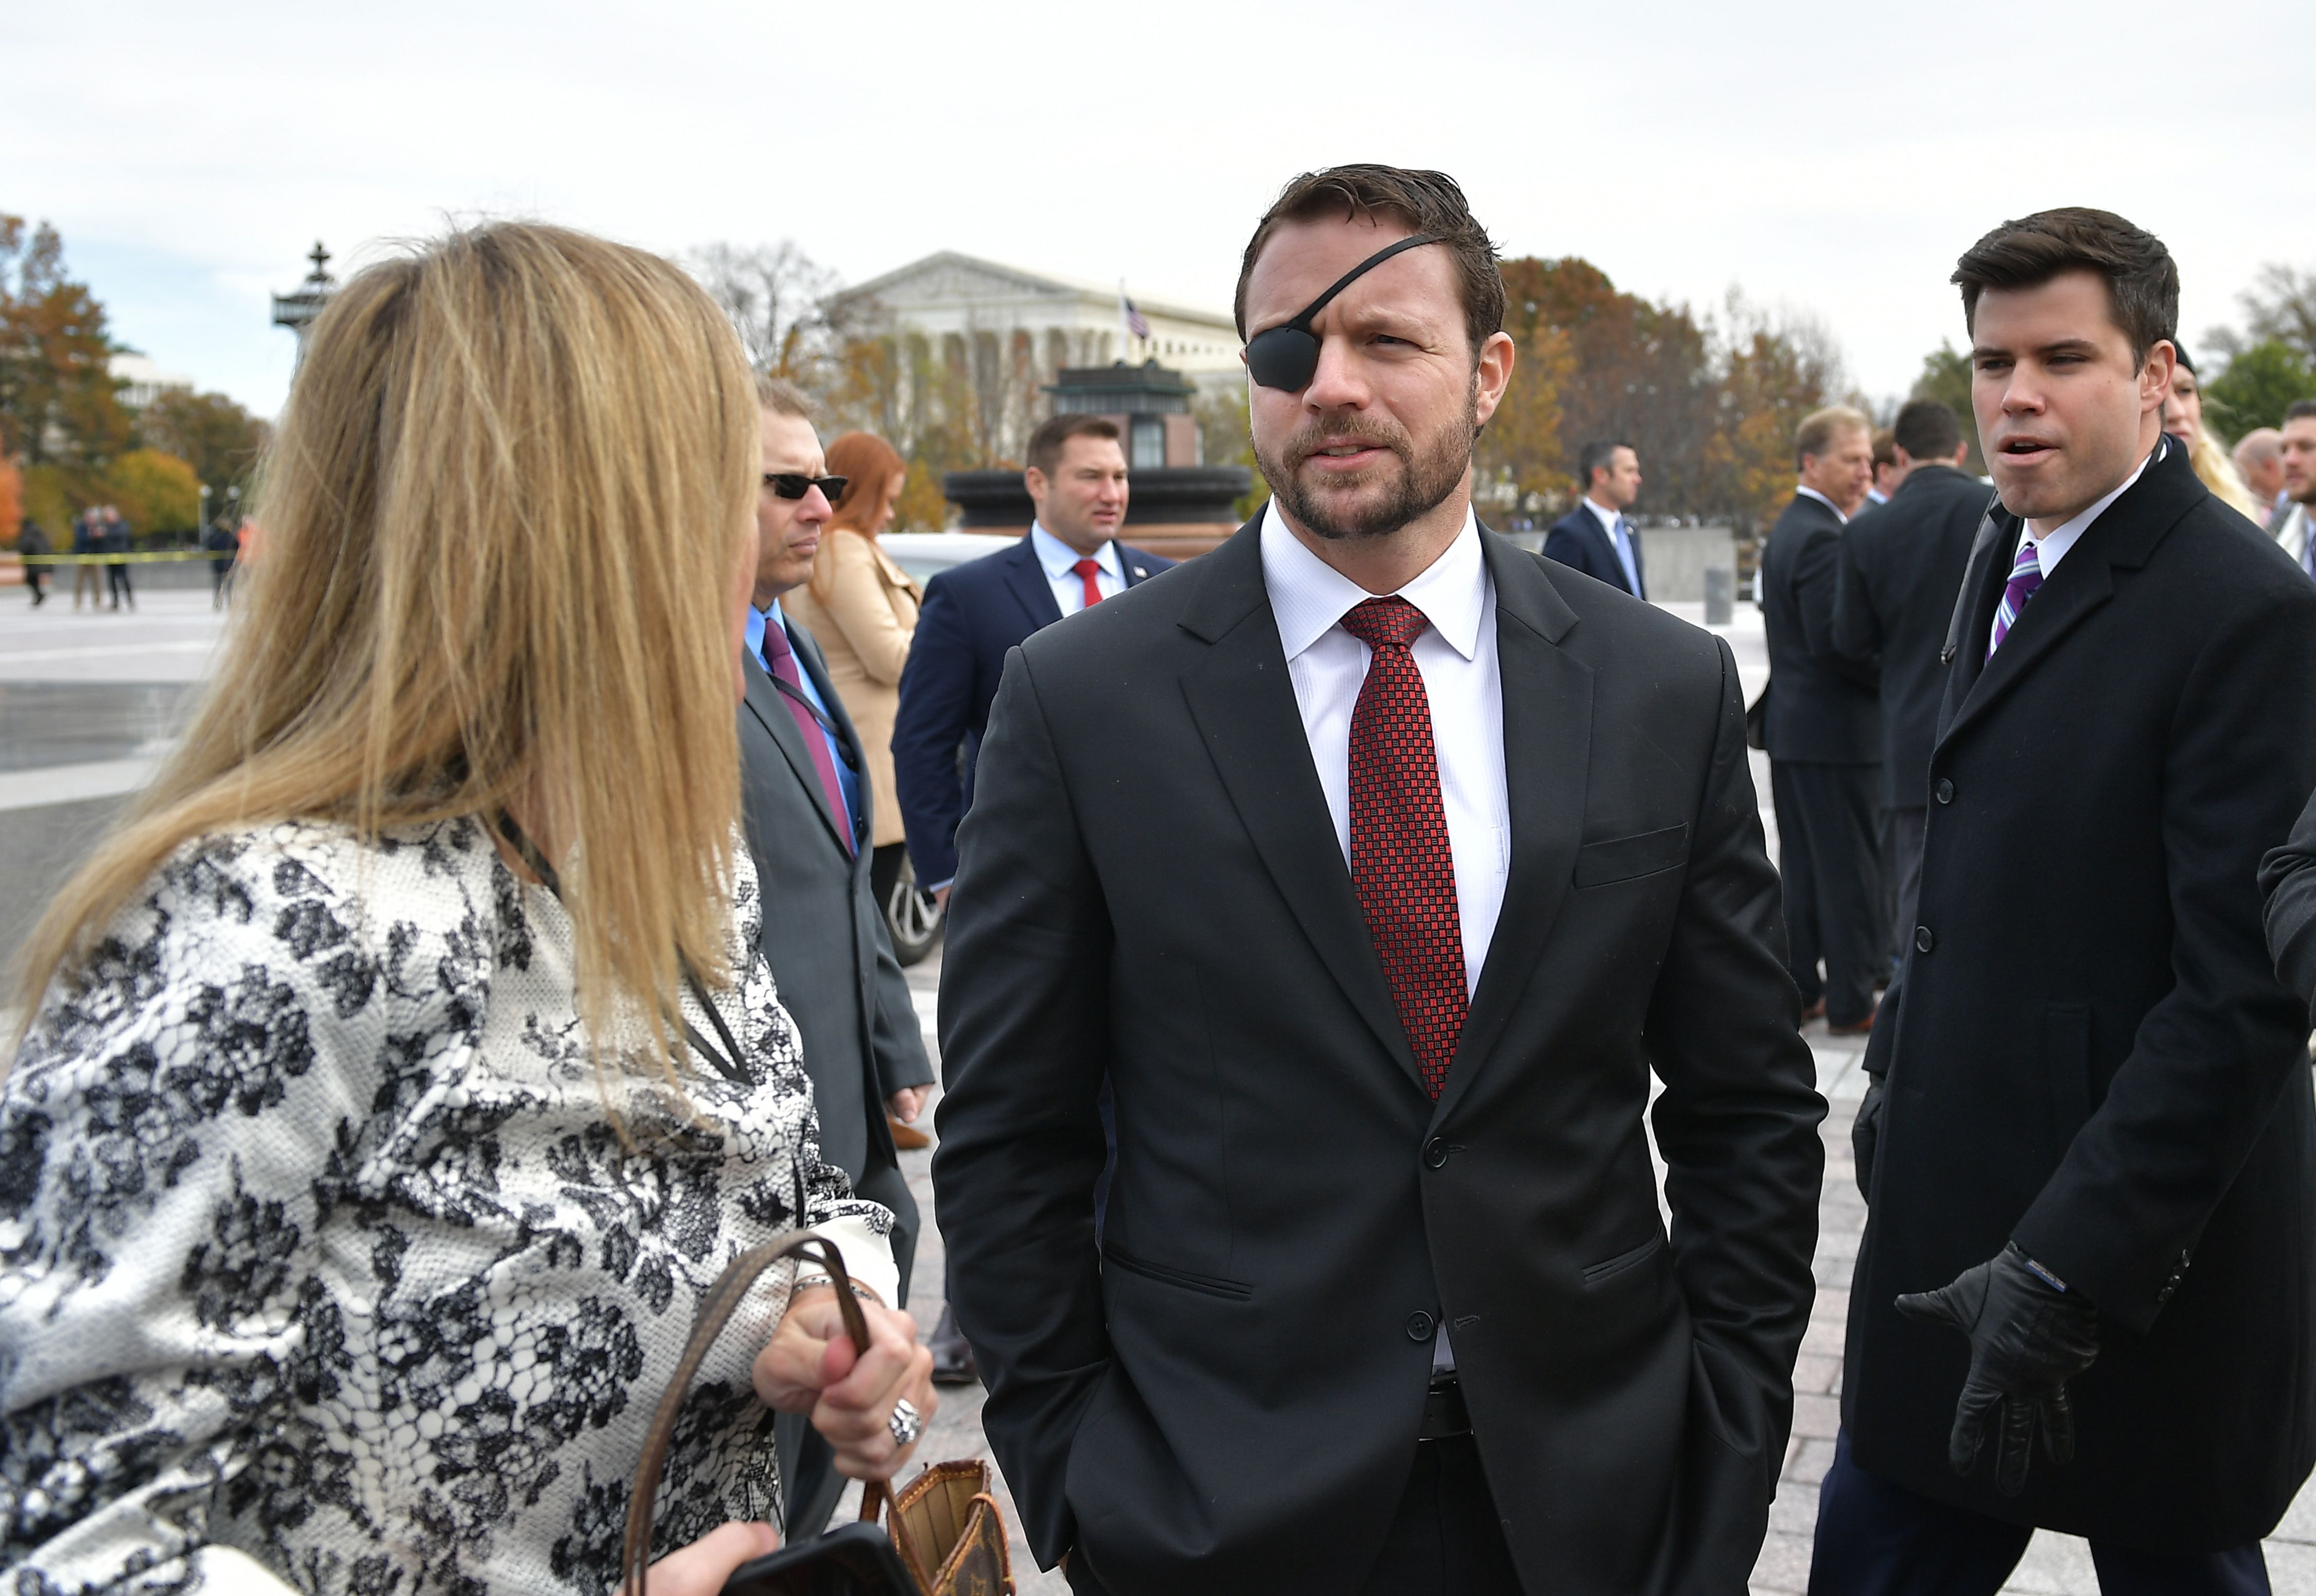 Republican House member-elect Dan Crenshaw is seen after posing for the 116th Congress members-elect group photo on the East Front Plaza of the US Capitol in Washington, DC on November 14, 2018. (Photo by MANDEL NGAN / AFP) (Photo credit should read MANDEL NGAN/AFP/Getty Images)